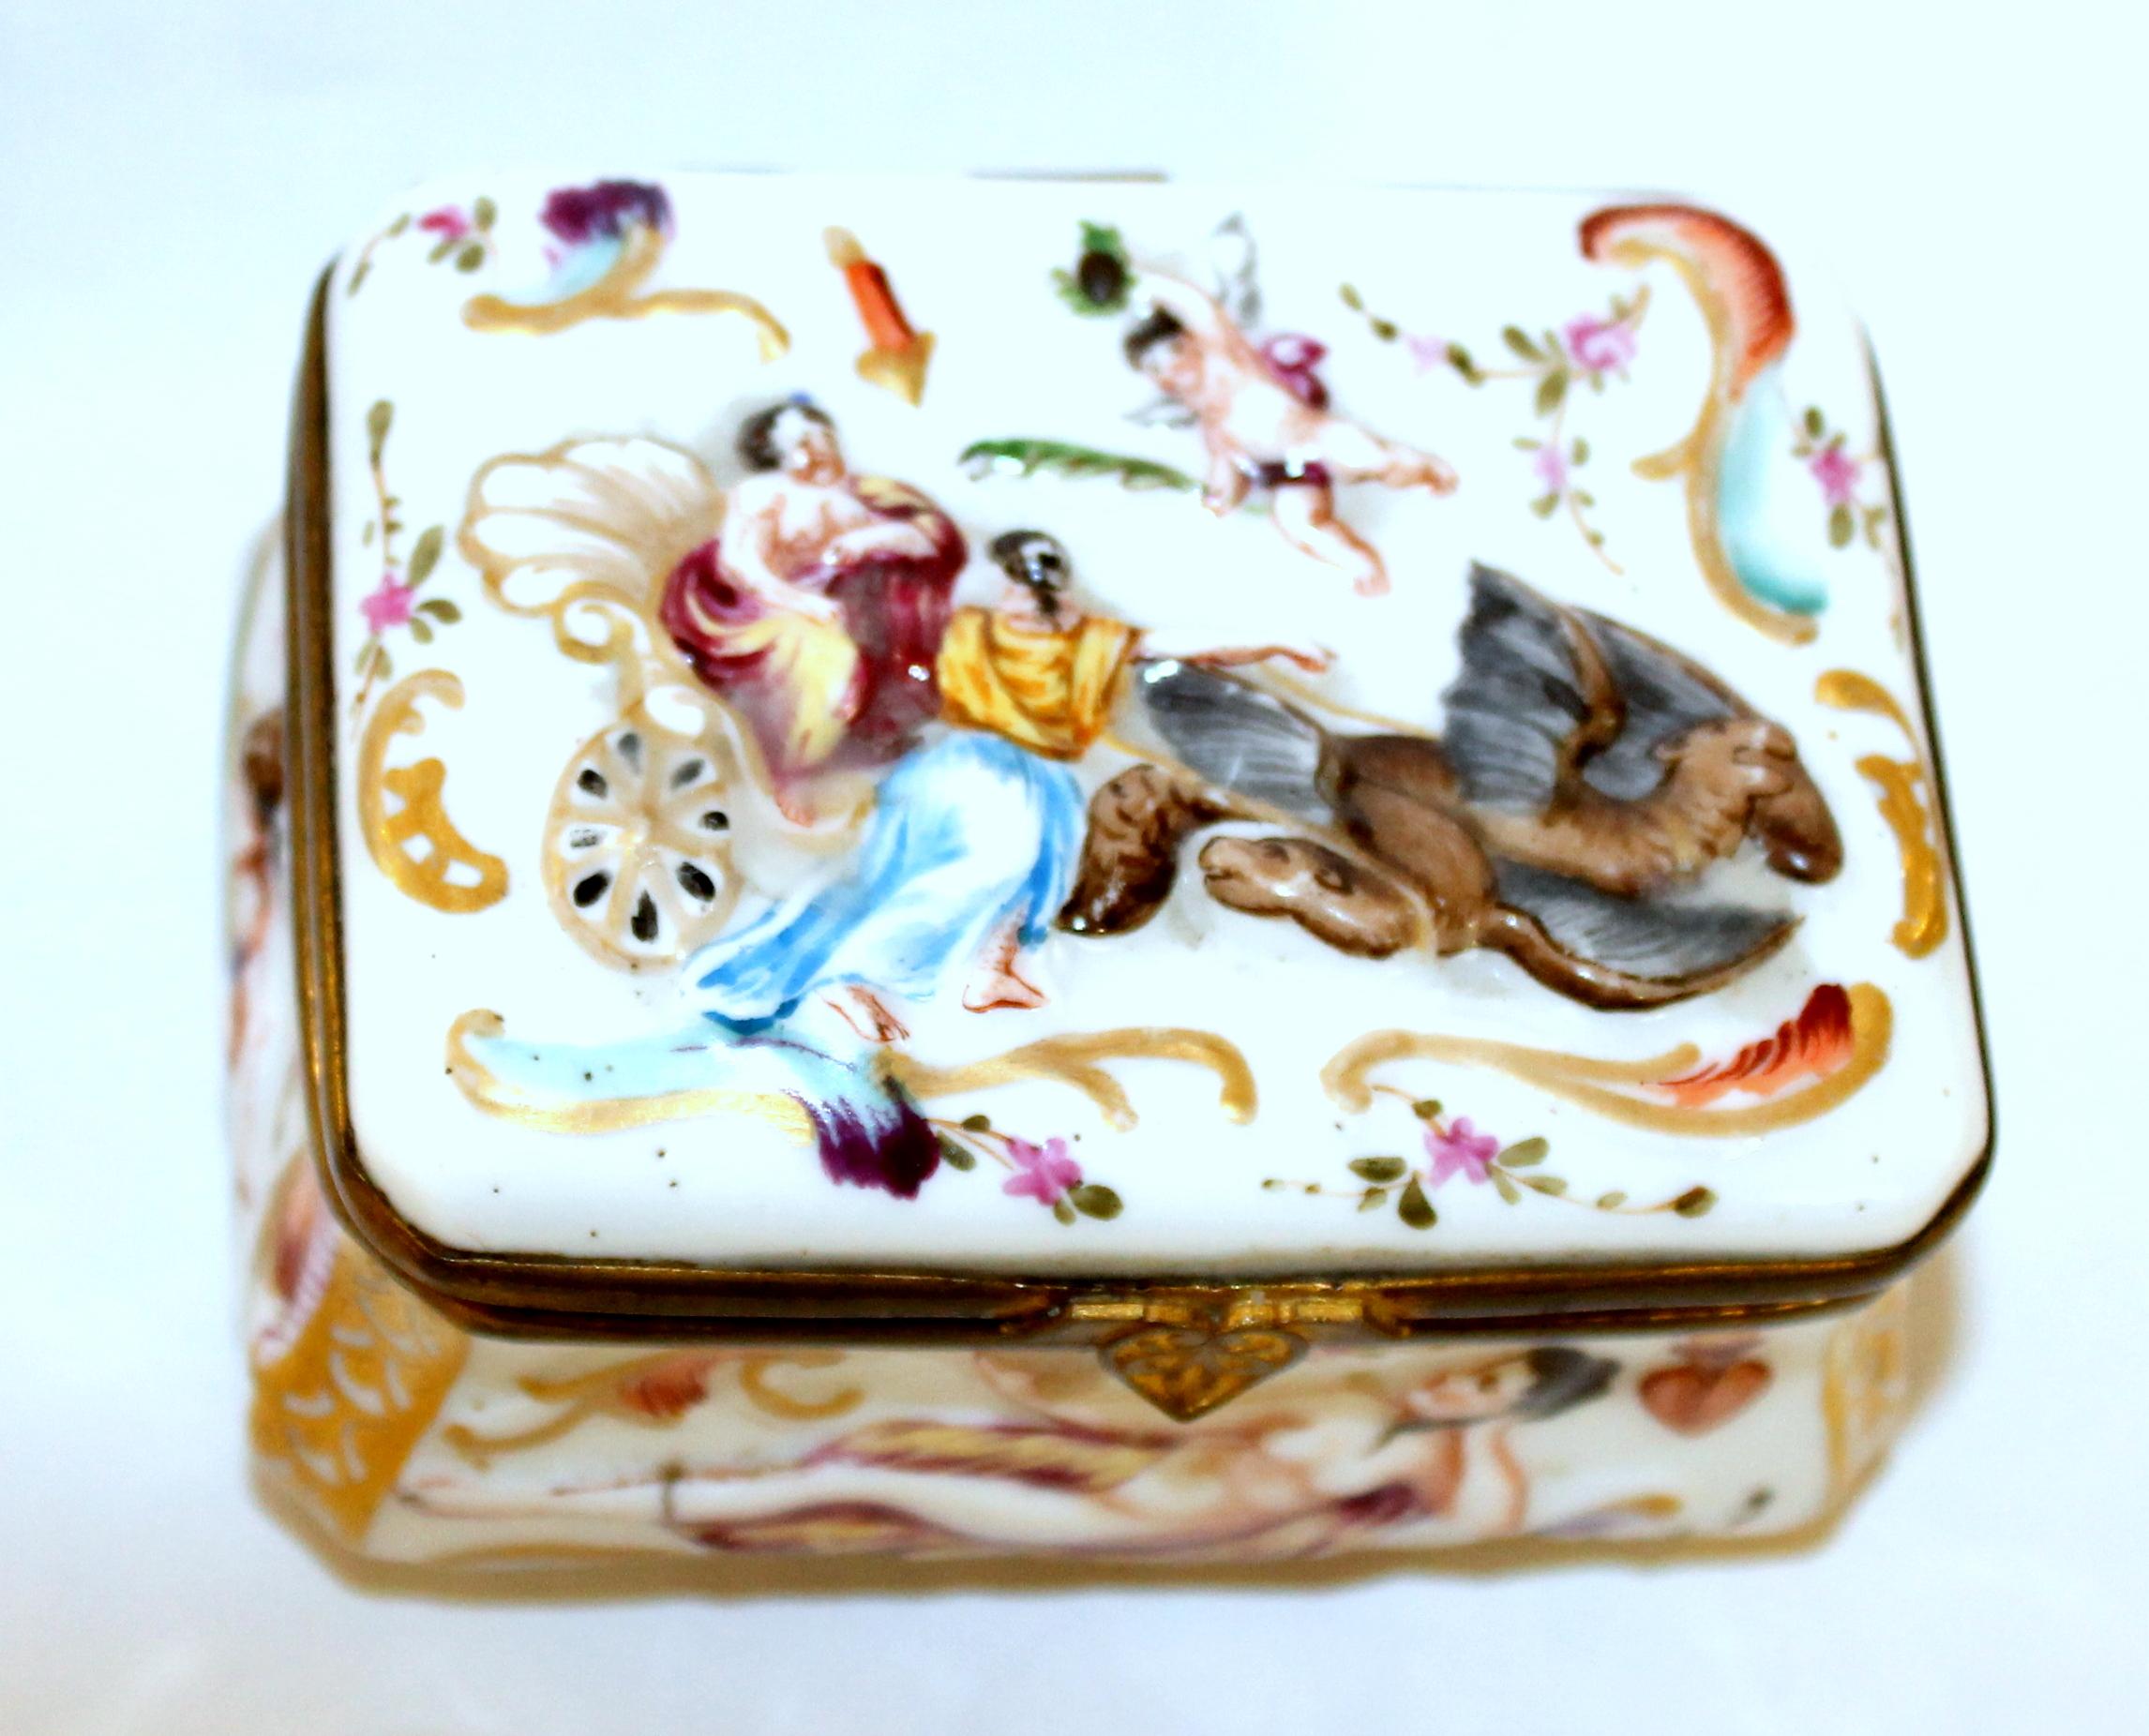 Rare antique Capodimonte type hand decorated hinged box with gorgeous original gilt interior and bas relief decoration on all sides including the bottom (quite unusual). No maker's marks found, but is in the classically decorated Capodimonte